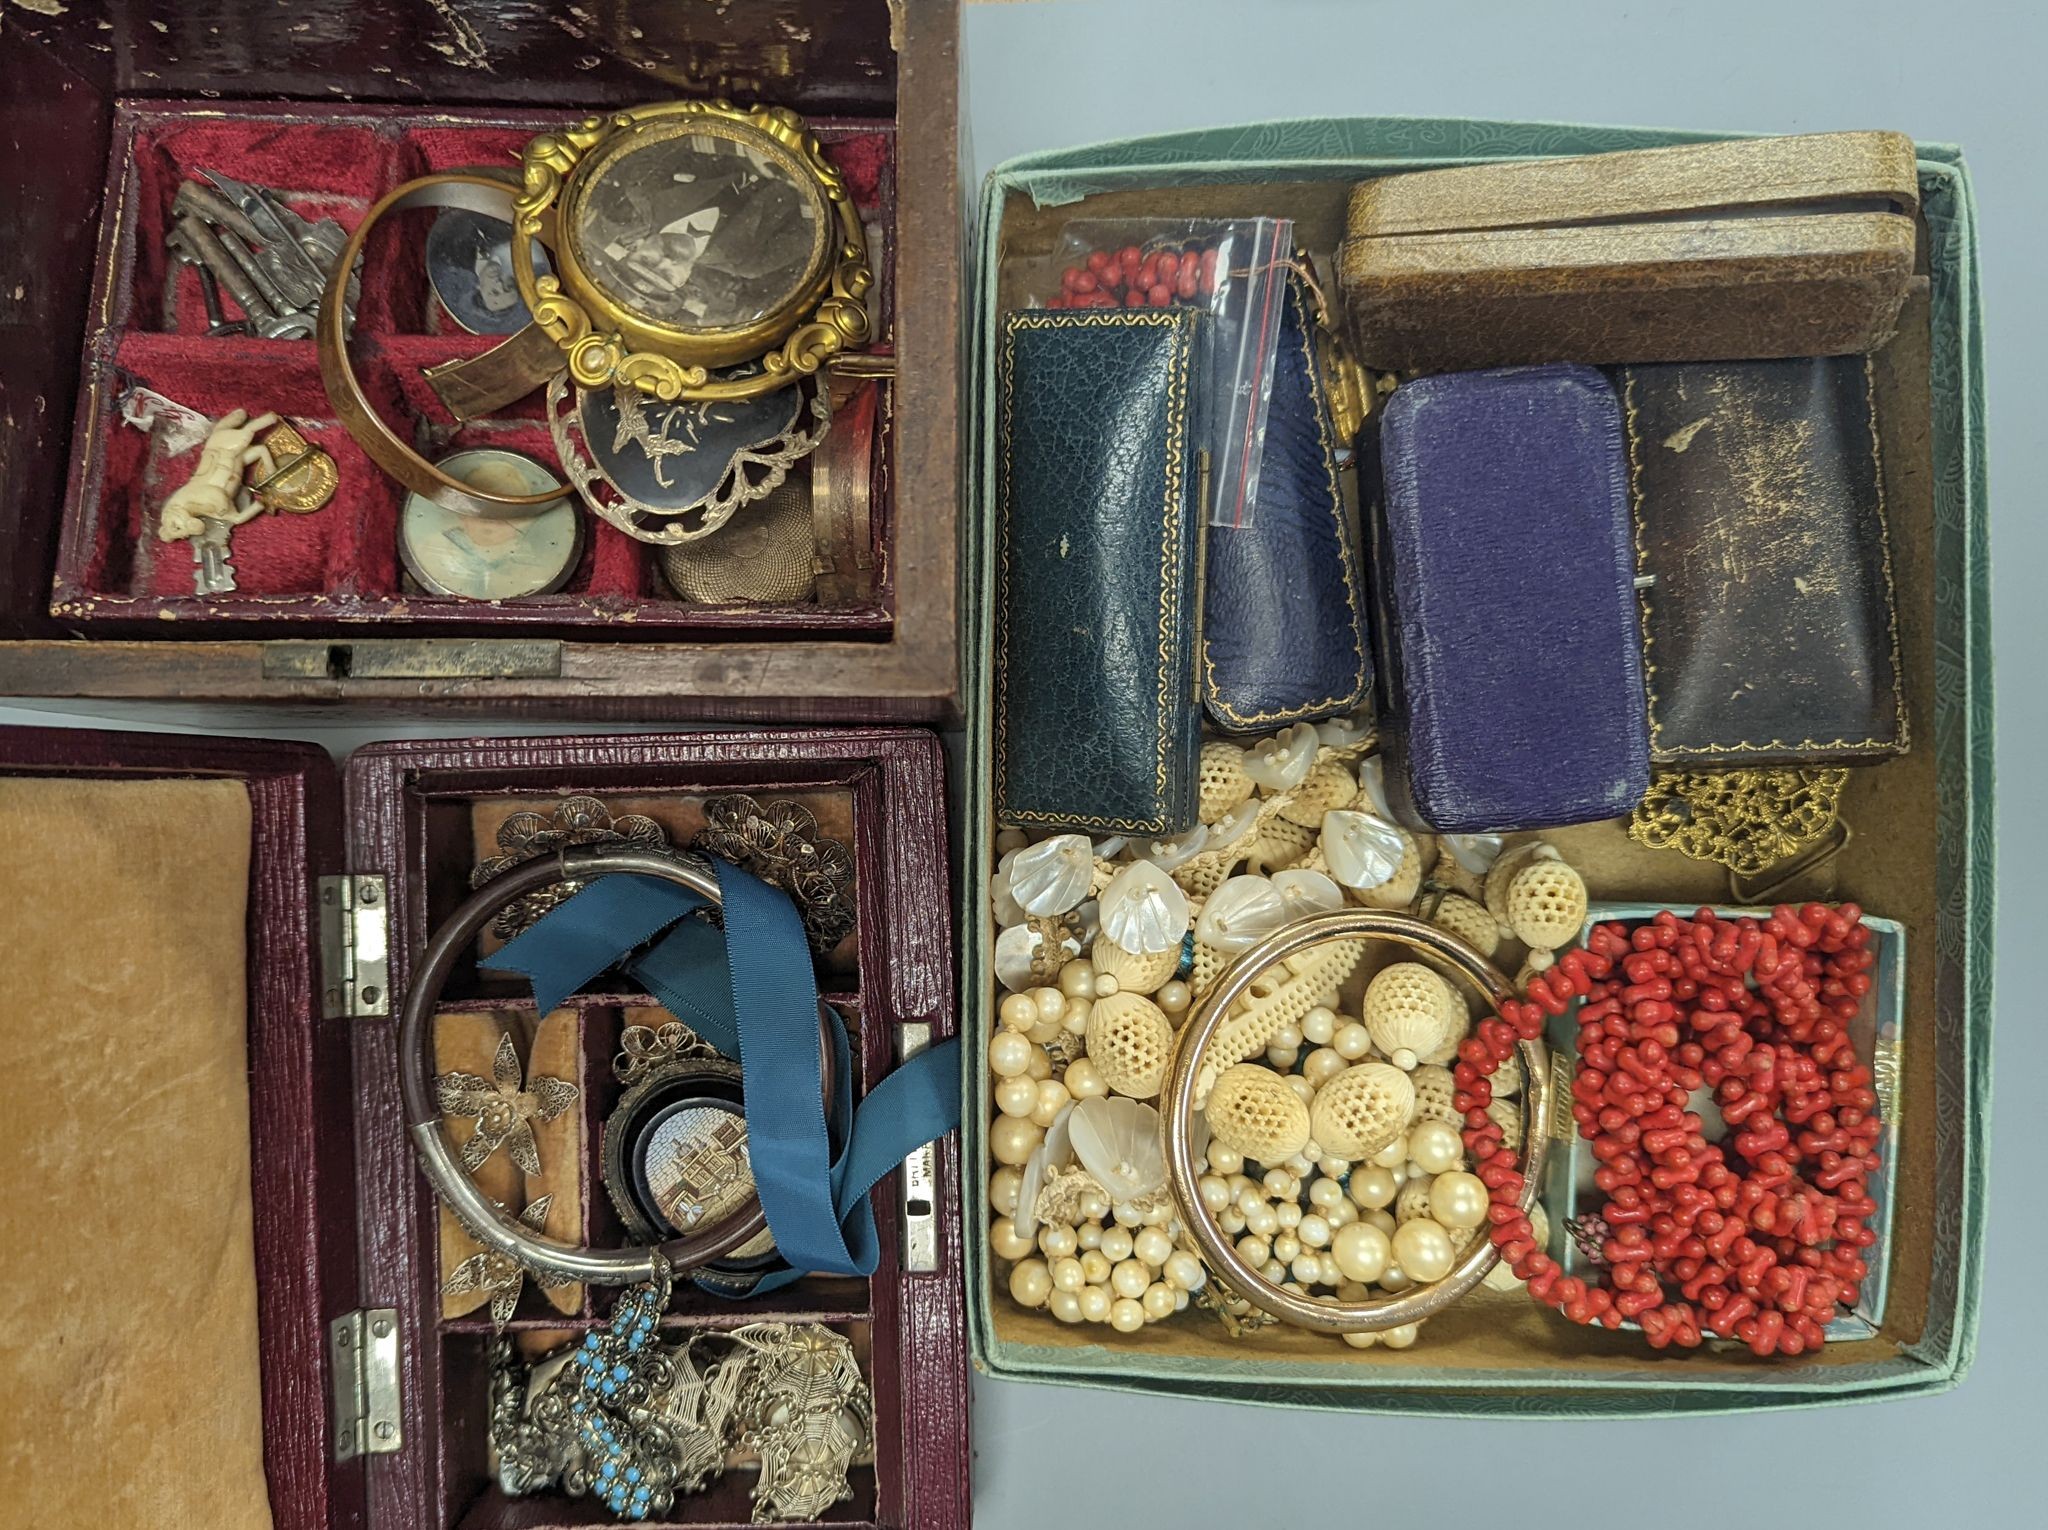 A quantity of assorted Victorian and later jewellery including costume and filigree and a 19th century tea caddy with conch shell inlay.